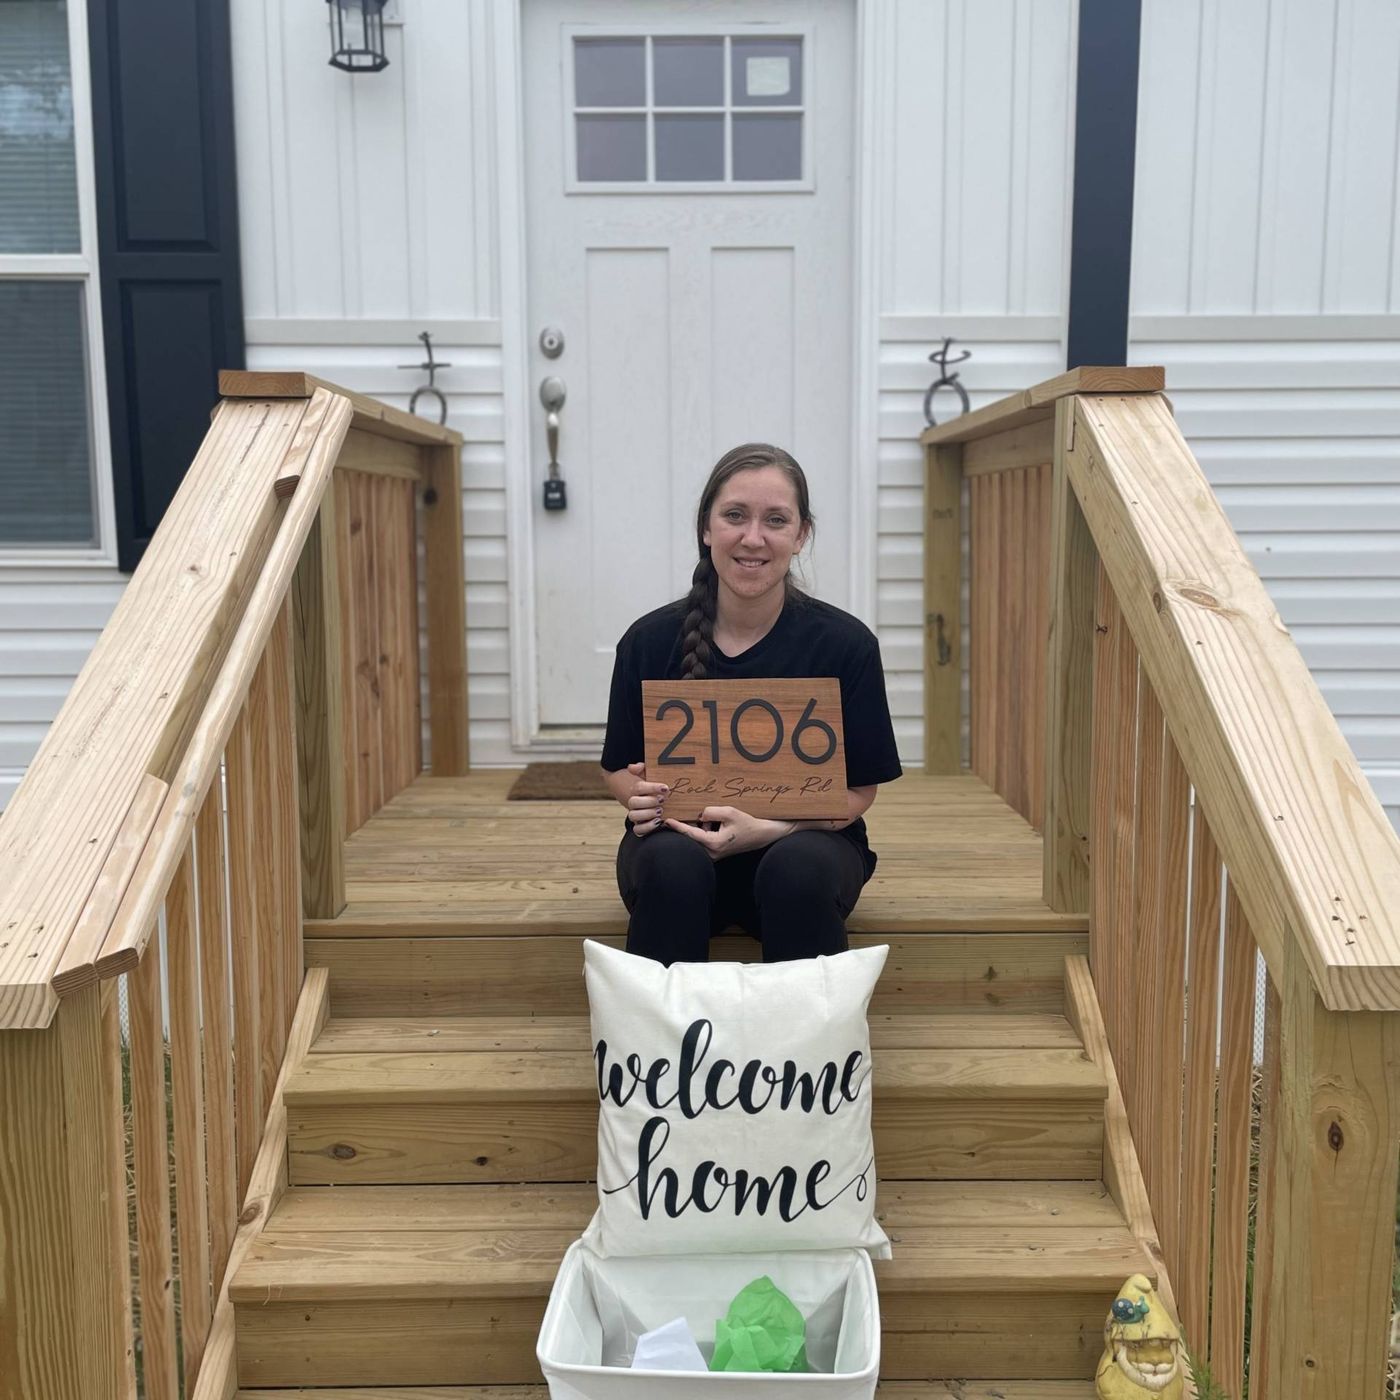 JENNY W. welcome home image